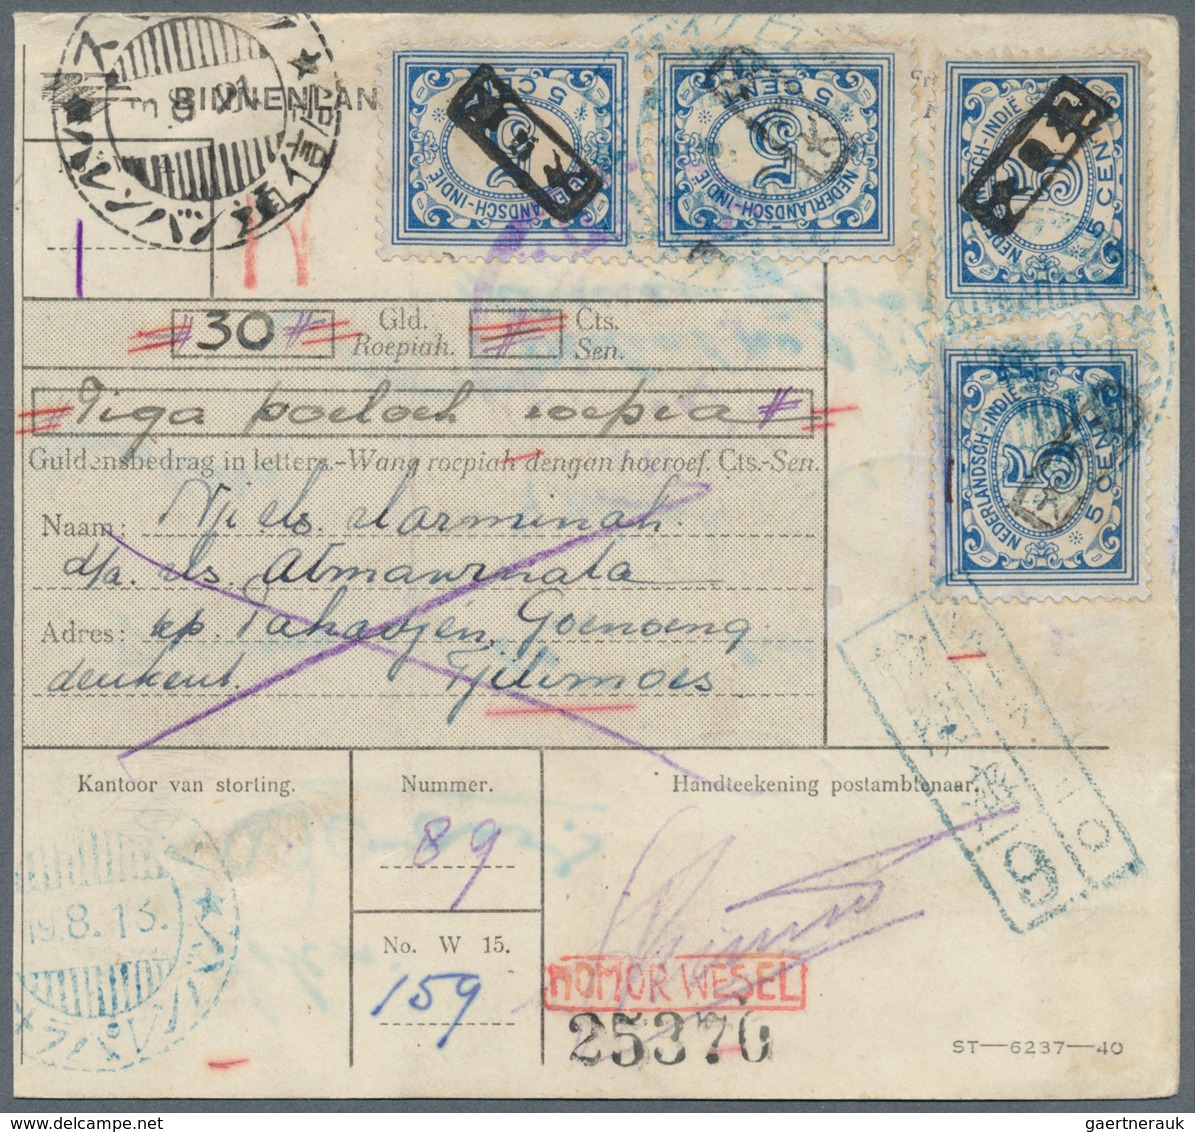 29471 Japanische Besetzung WK II: 1942/45, covers/stationery (70+) plus some MNH units of due stamps Navy